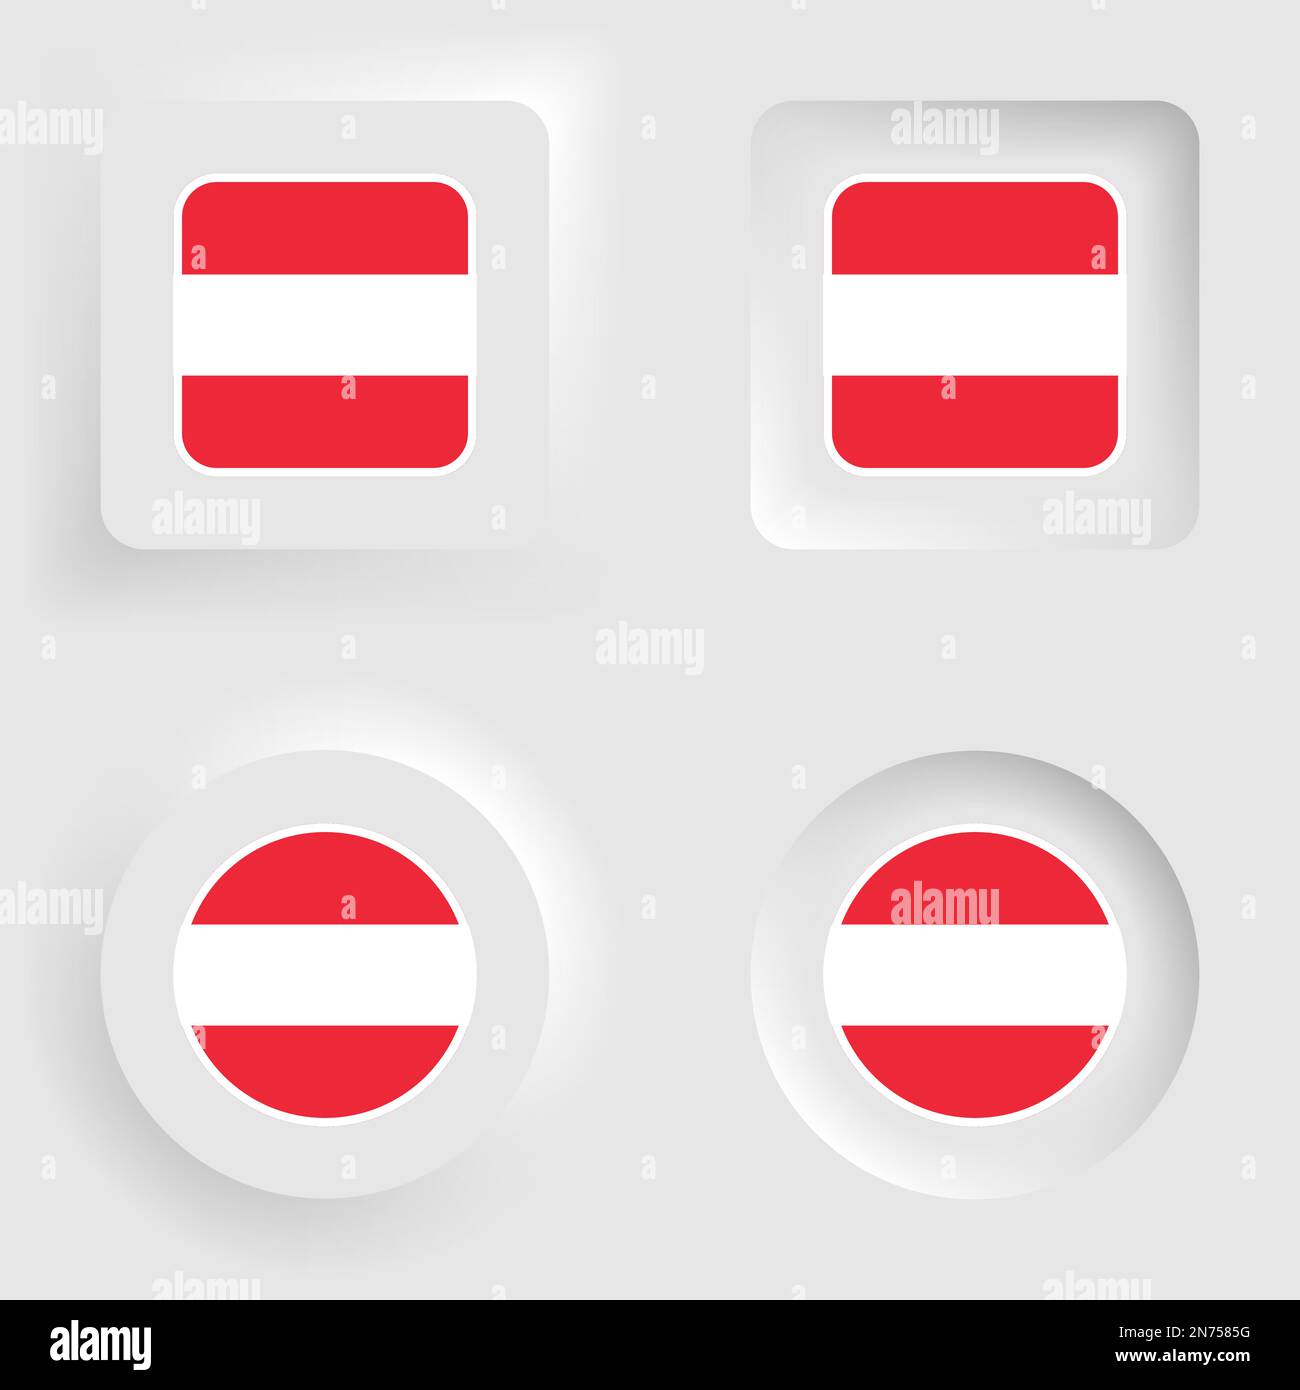 Austria neumorphic graphic and label set. Element of impact for the use you want to make of it. Stock Vector